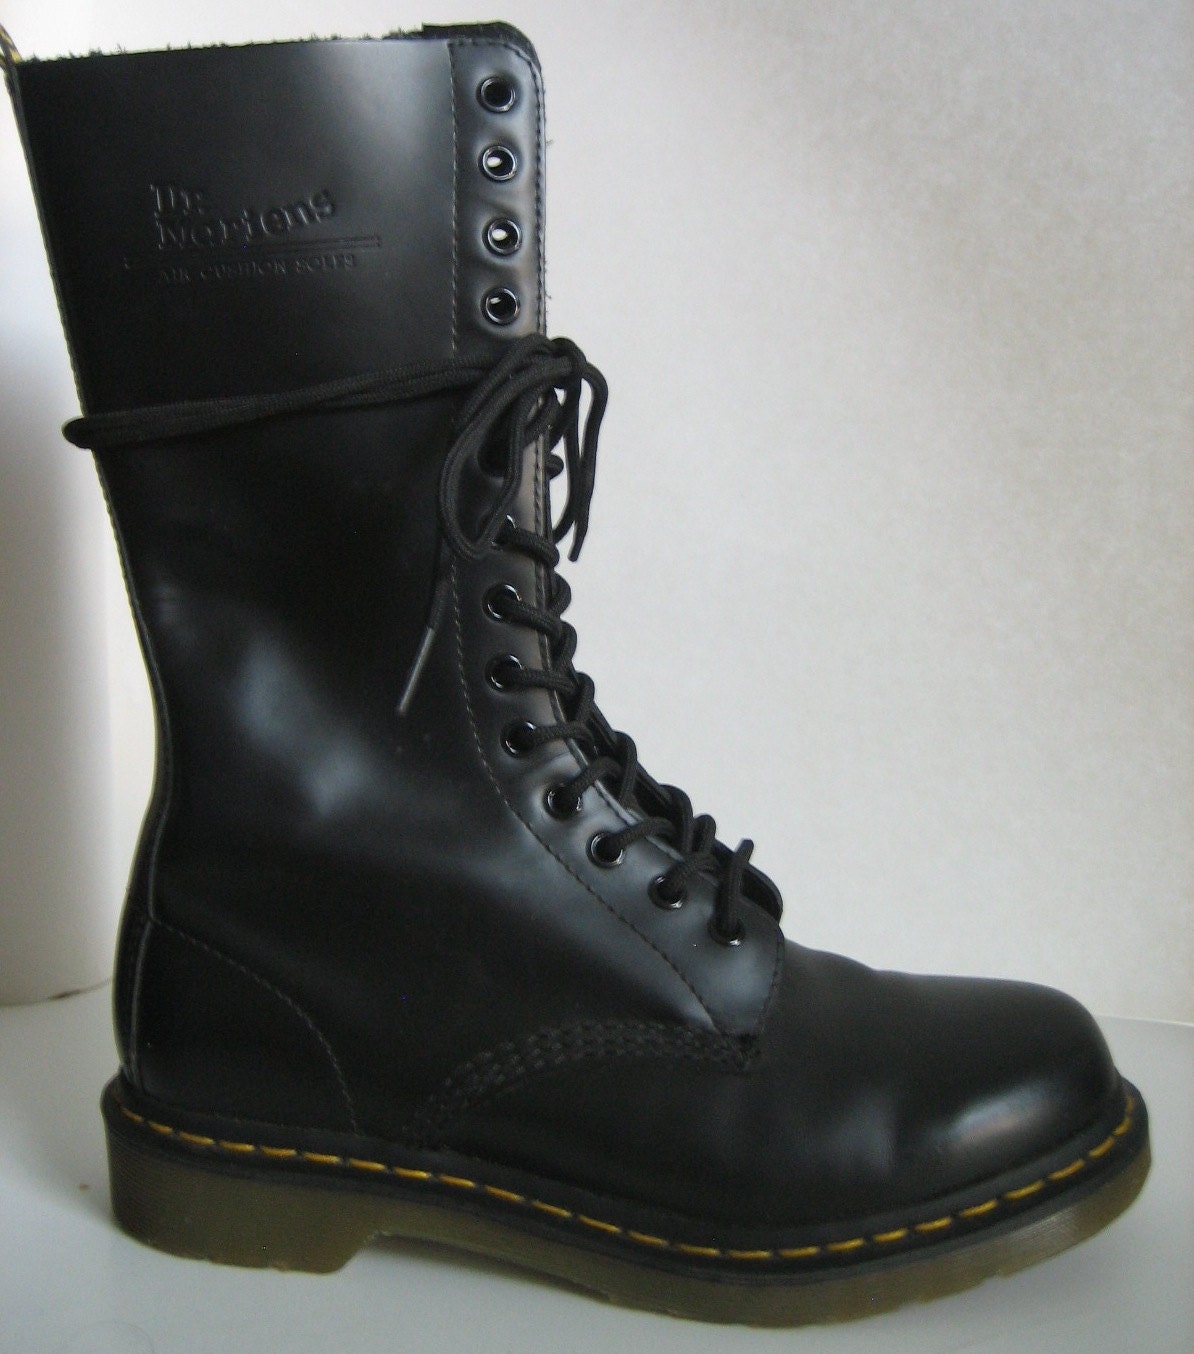 New DOC MARTENS black 14 hole lace up boots size 8 / 8.5